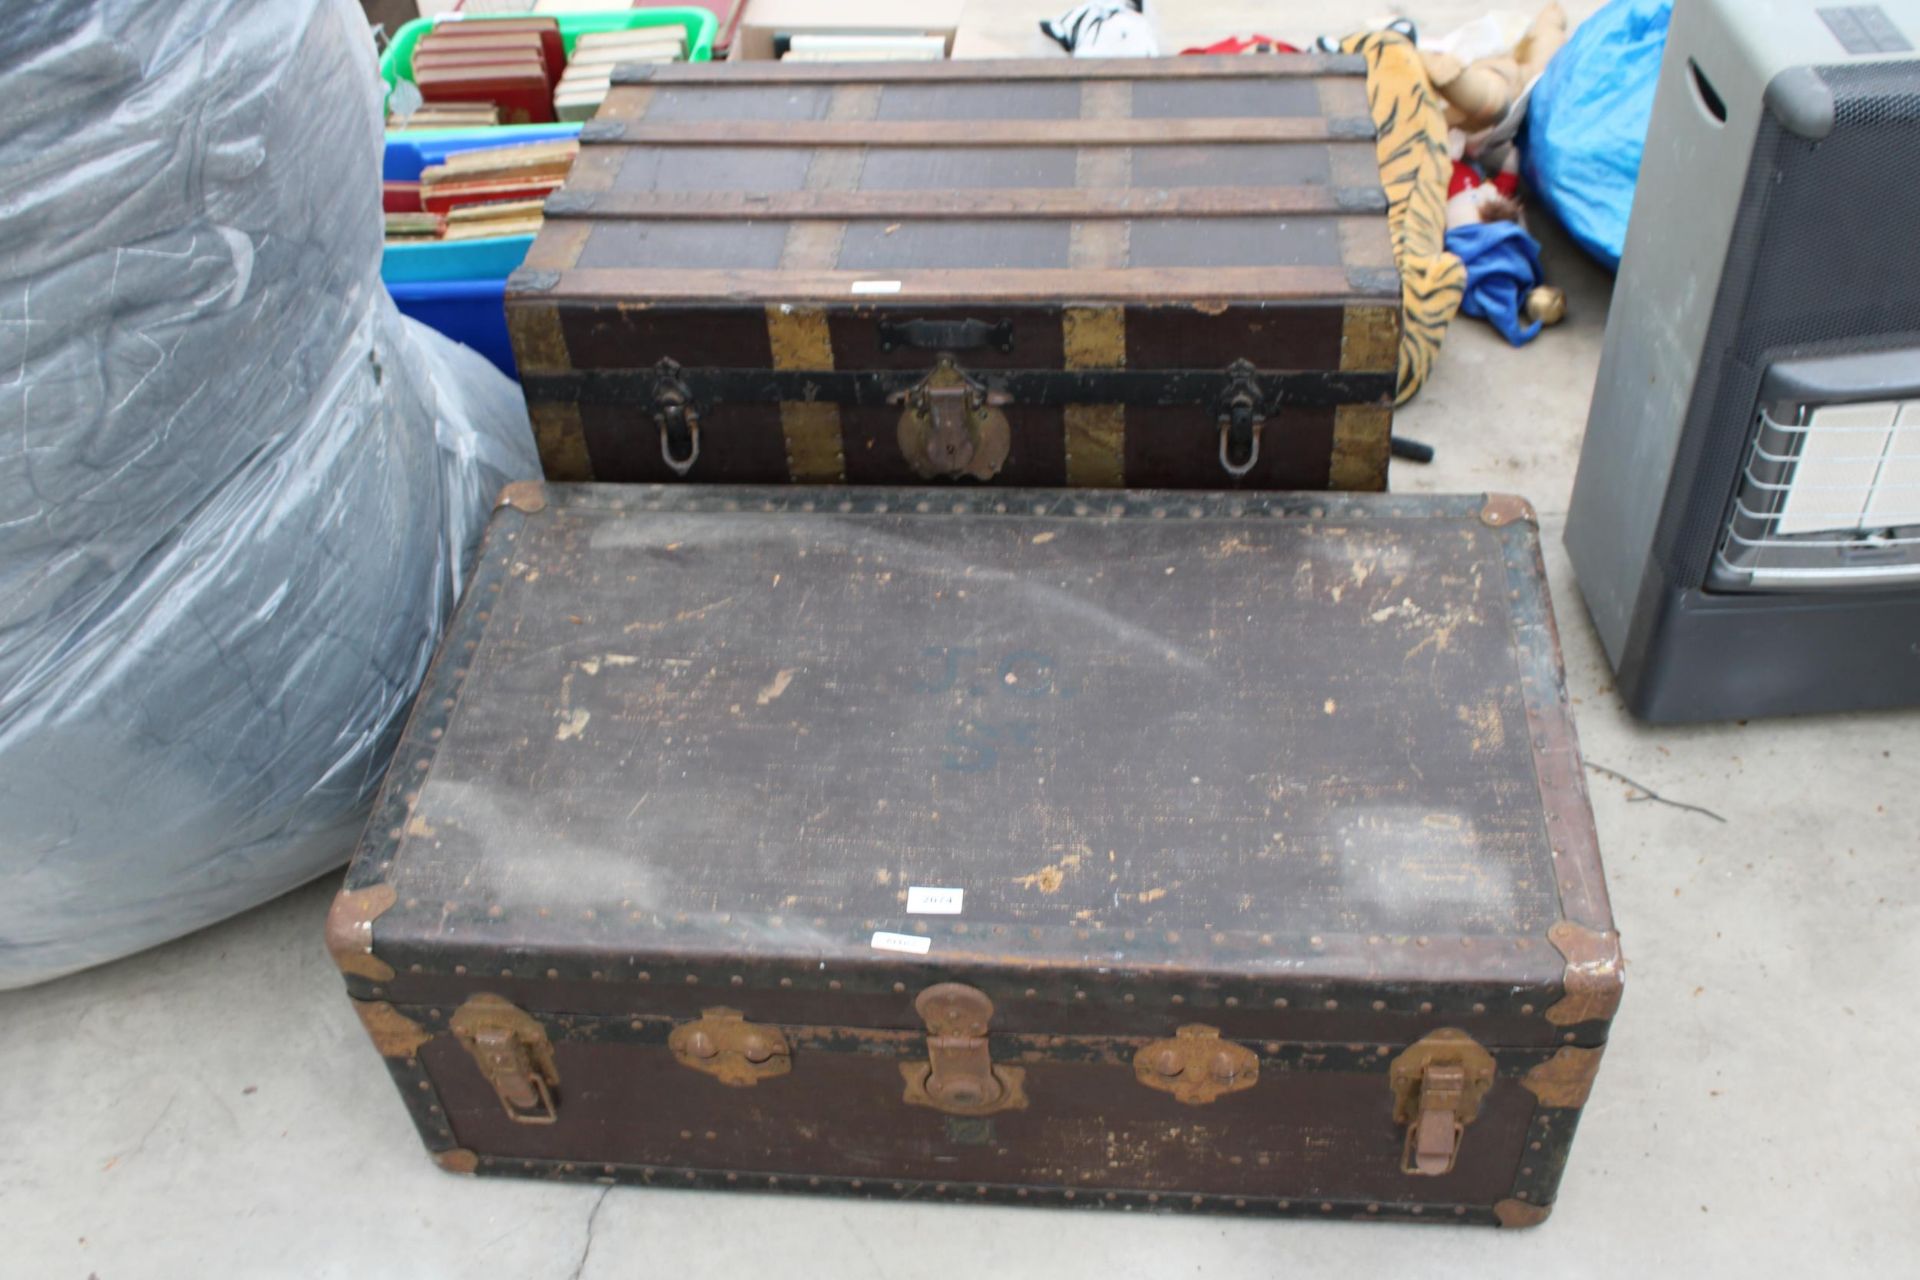 TWO VINTAGE TRAVEL TRUNKS